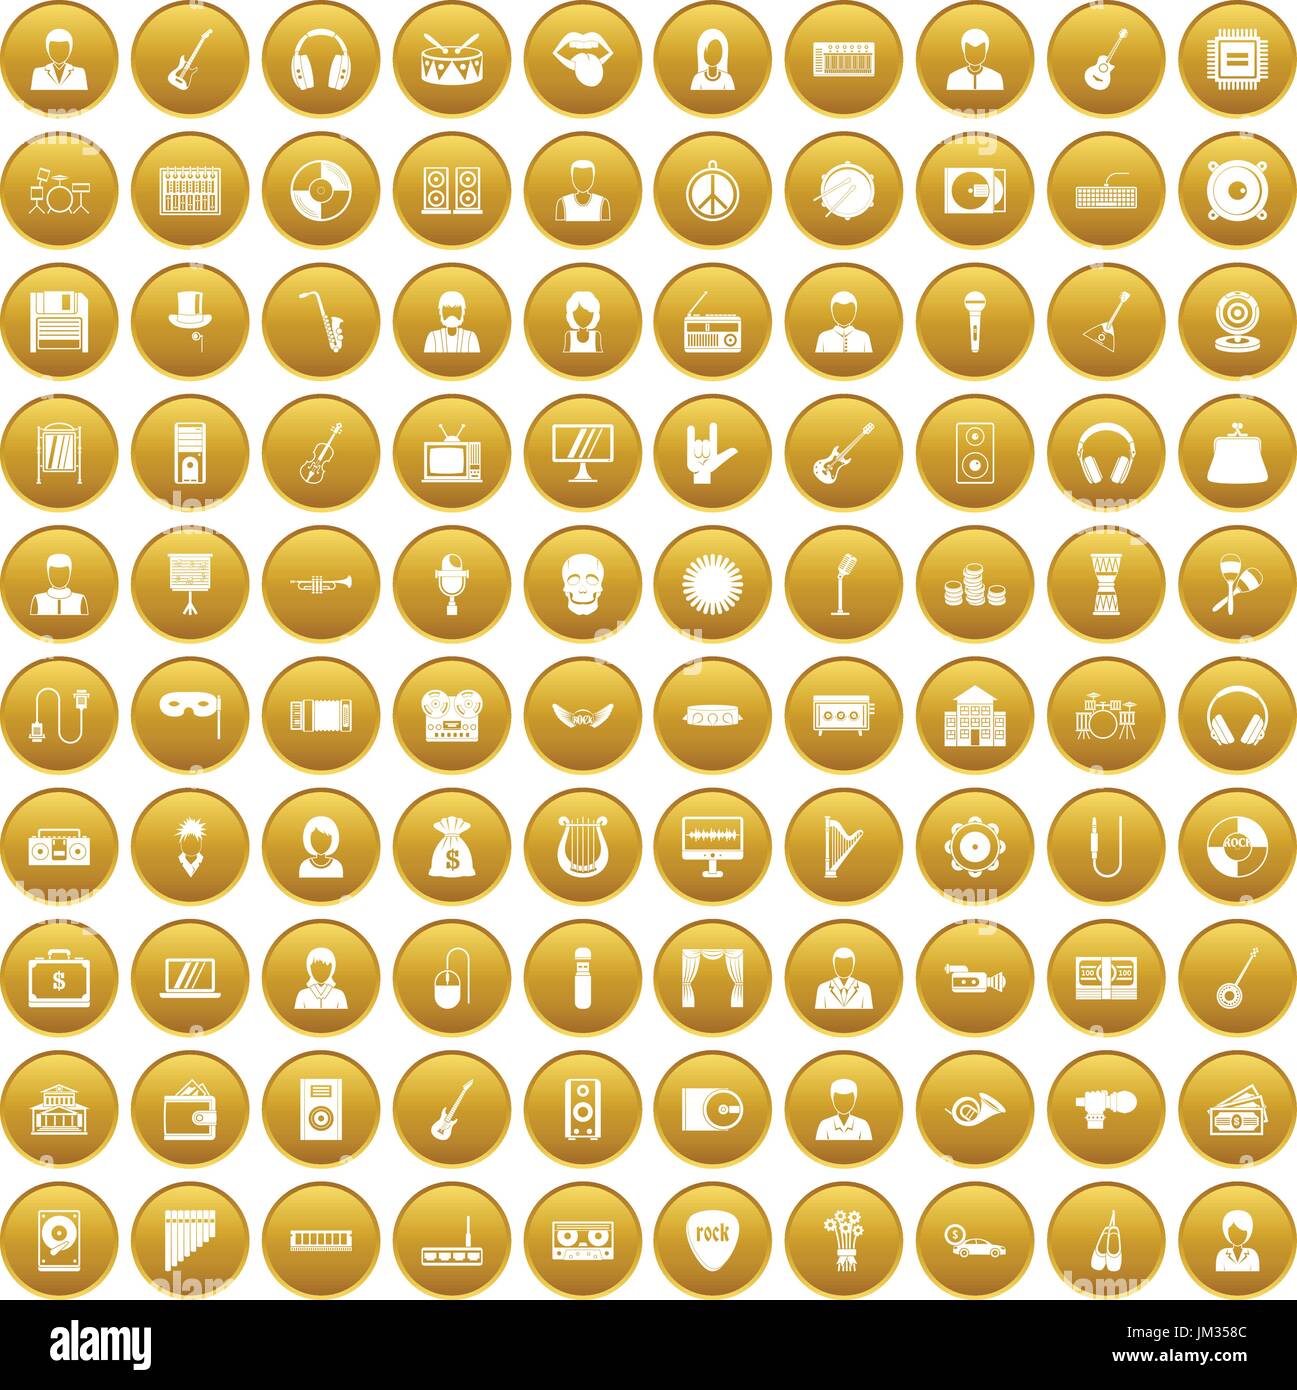 100 music icons set gold Stock Vector